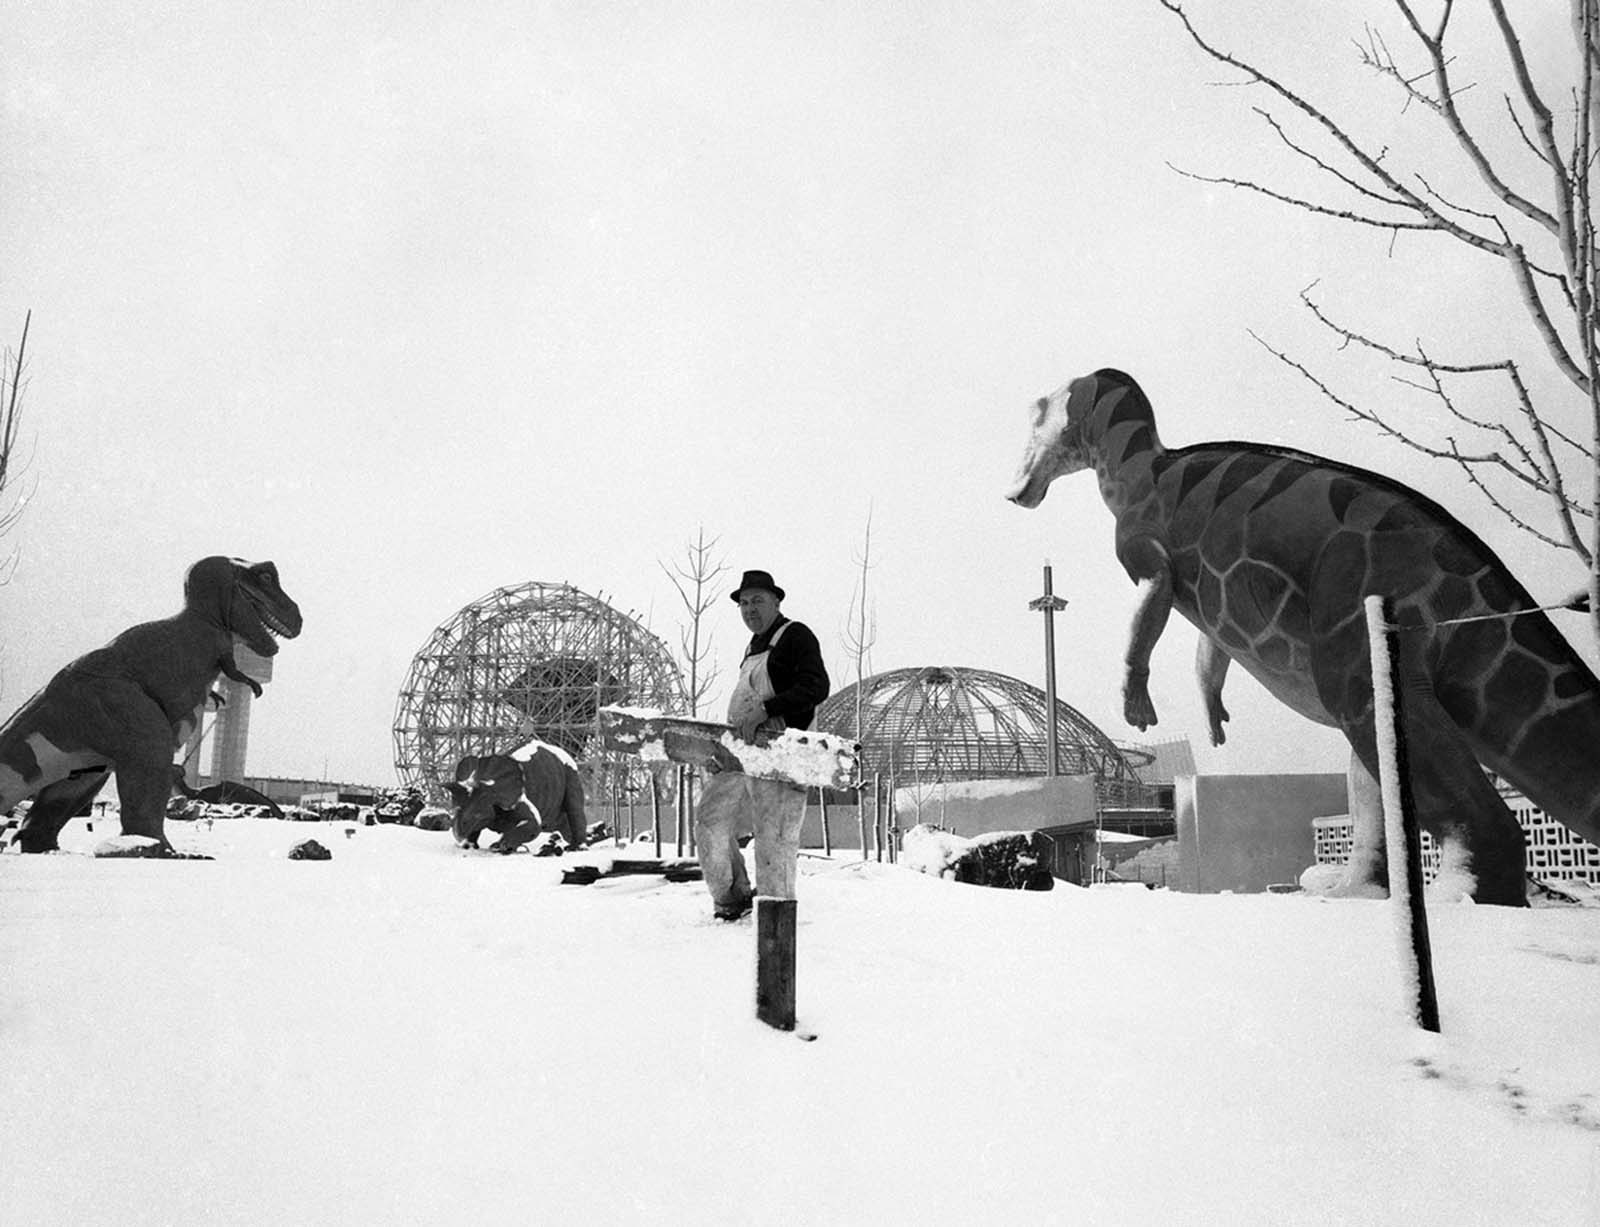 Carpenter Henry Johnson doesn't seem to concerned about his clutch of prehistoric companions at the Sinclair Oil Exhibit in the World's Fair grounds, New York City, February 19, 1964. The Ferris wheel-like contraption behind Johnson to the right is the U.S. Rubber Exhibit.